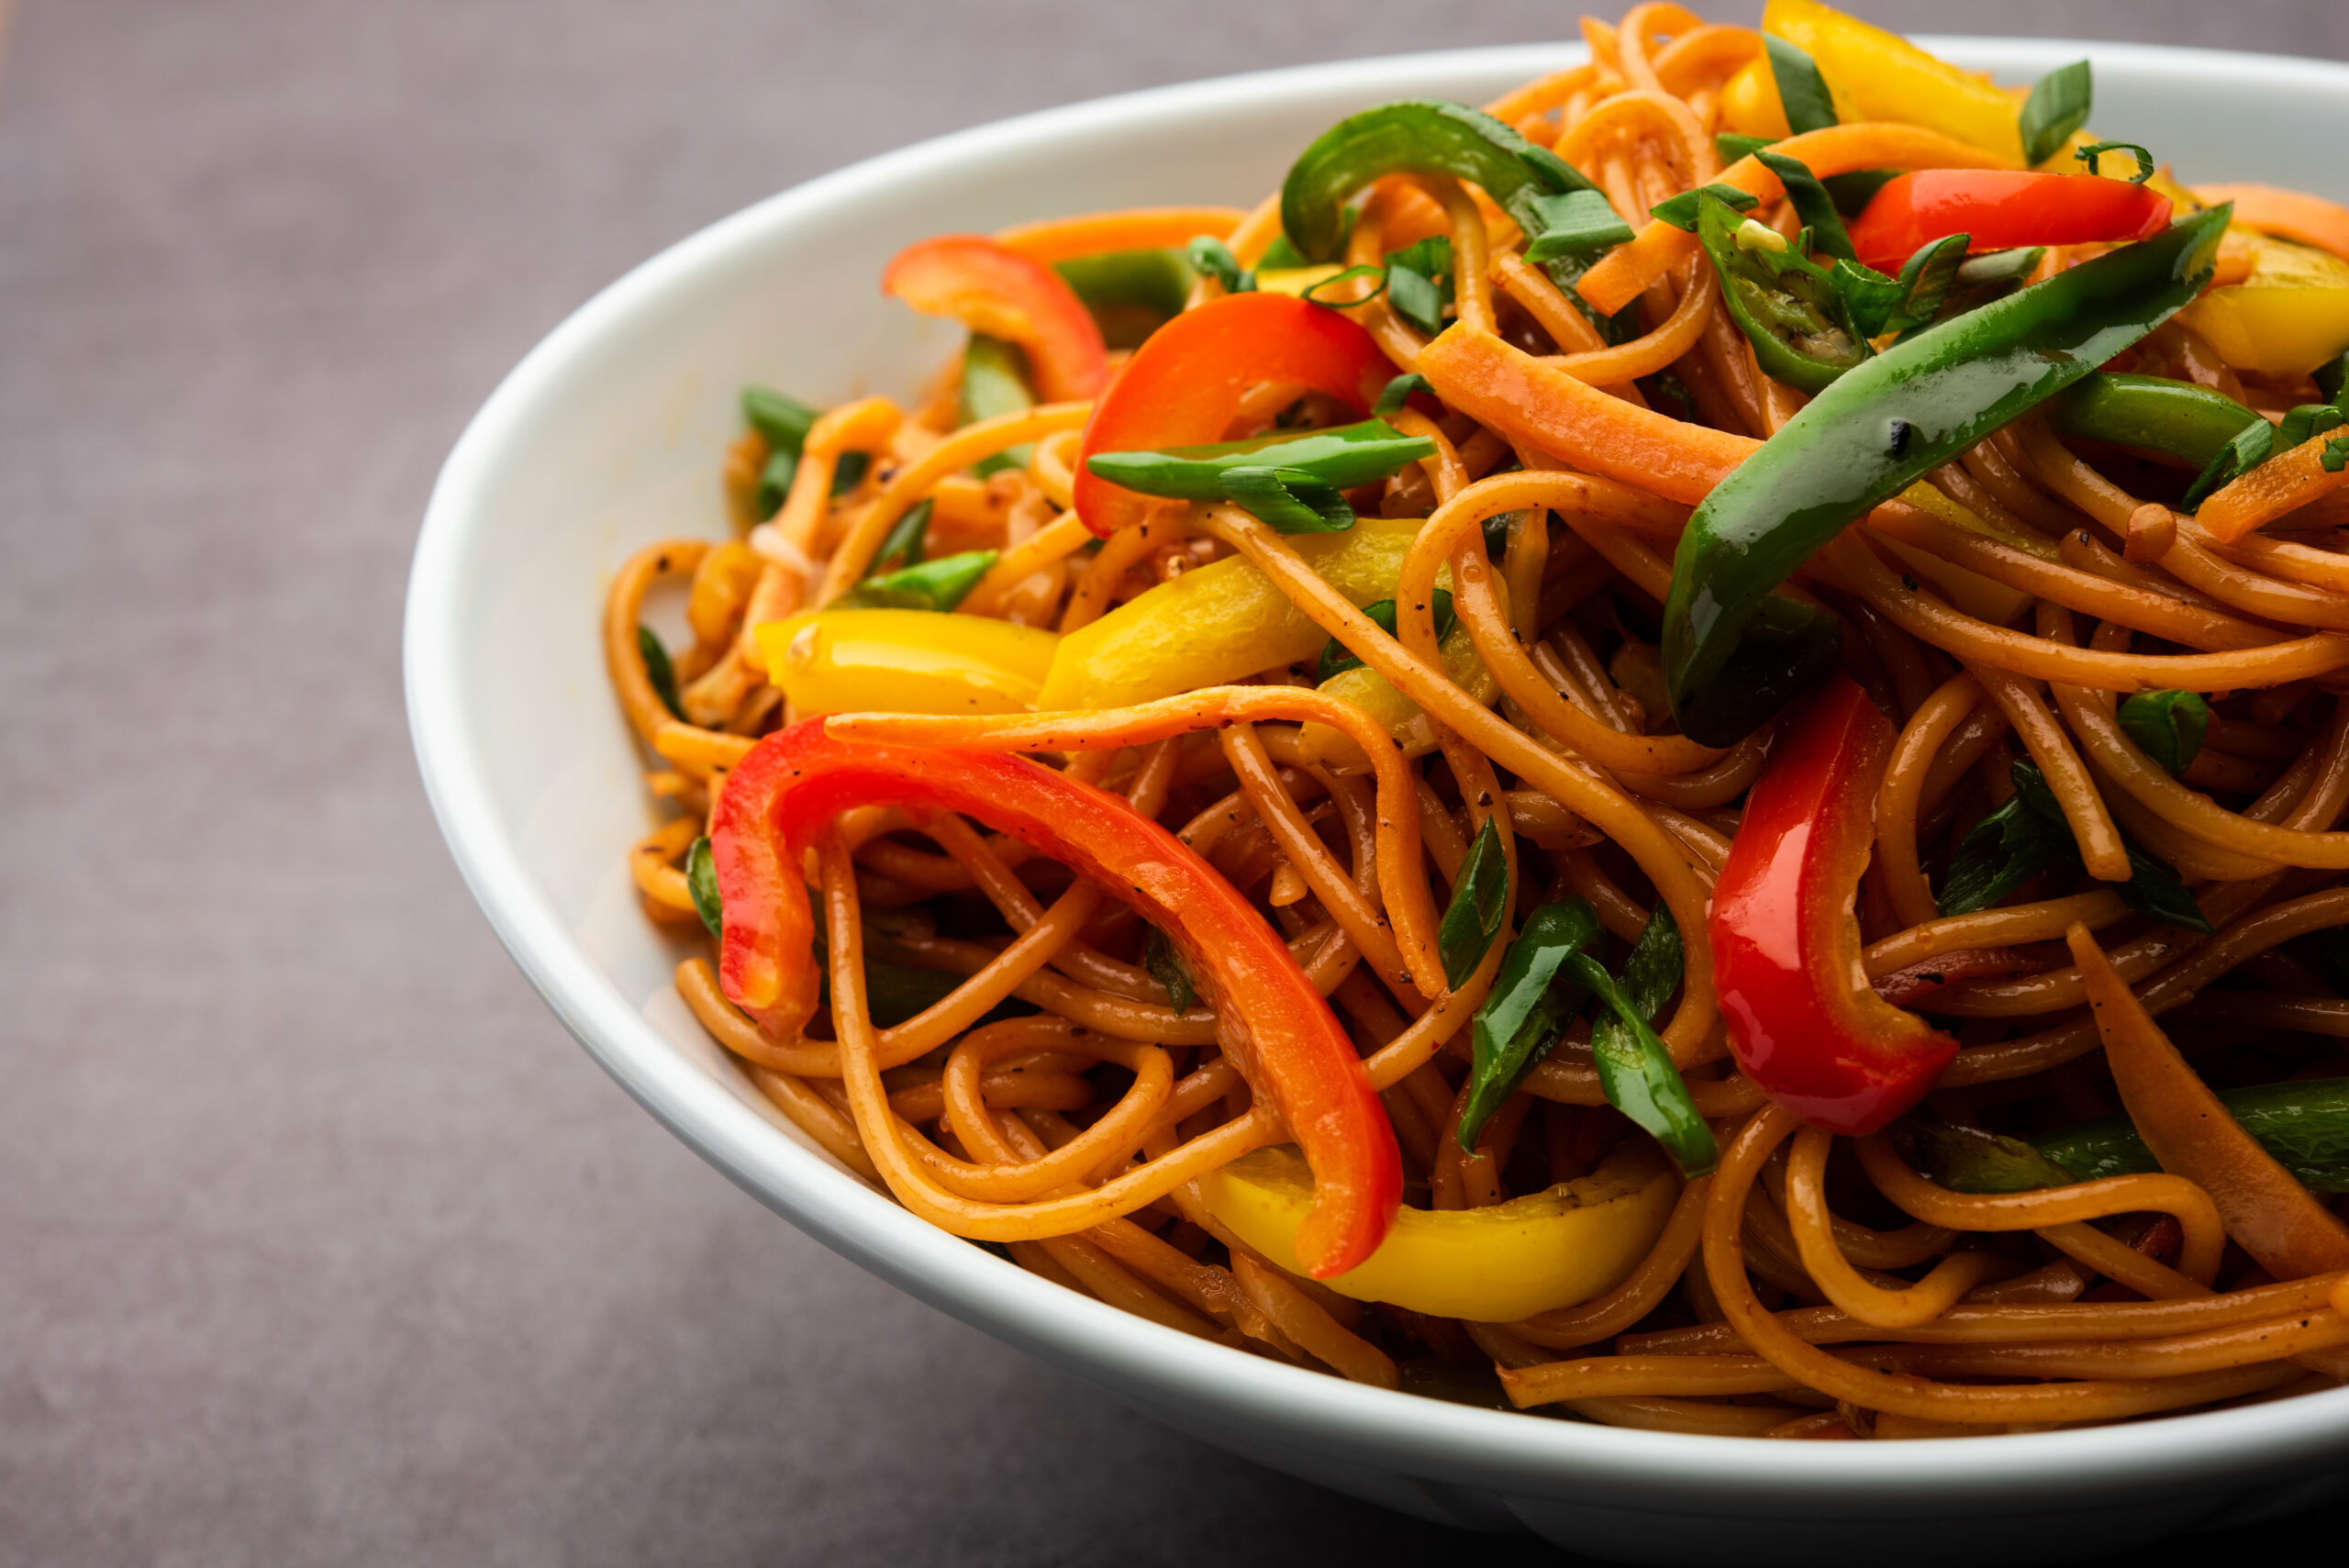 Schezwan Noodles or Szechwan vegetable Hakka Noodles or chow mein is a popular Indo-Chinese recipes, served in a bowl or plate with wooden chopsticks